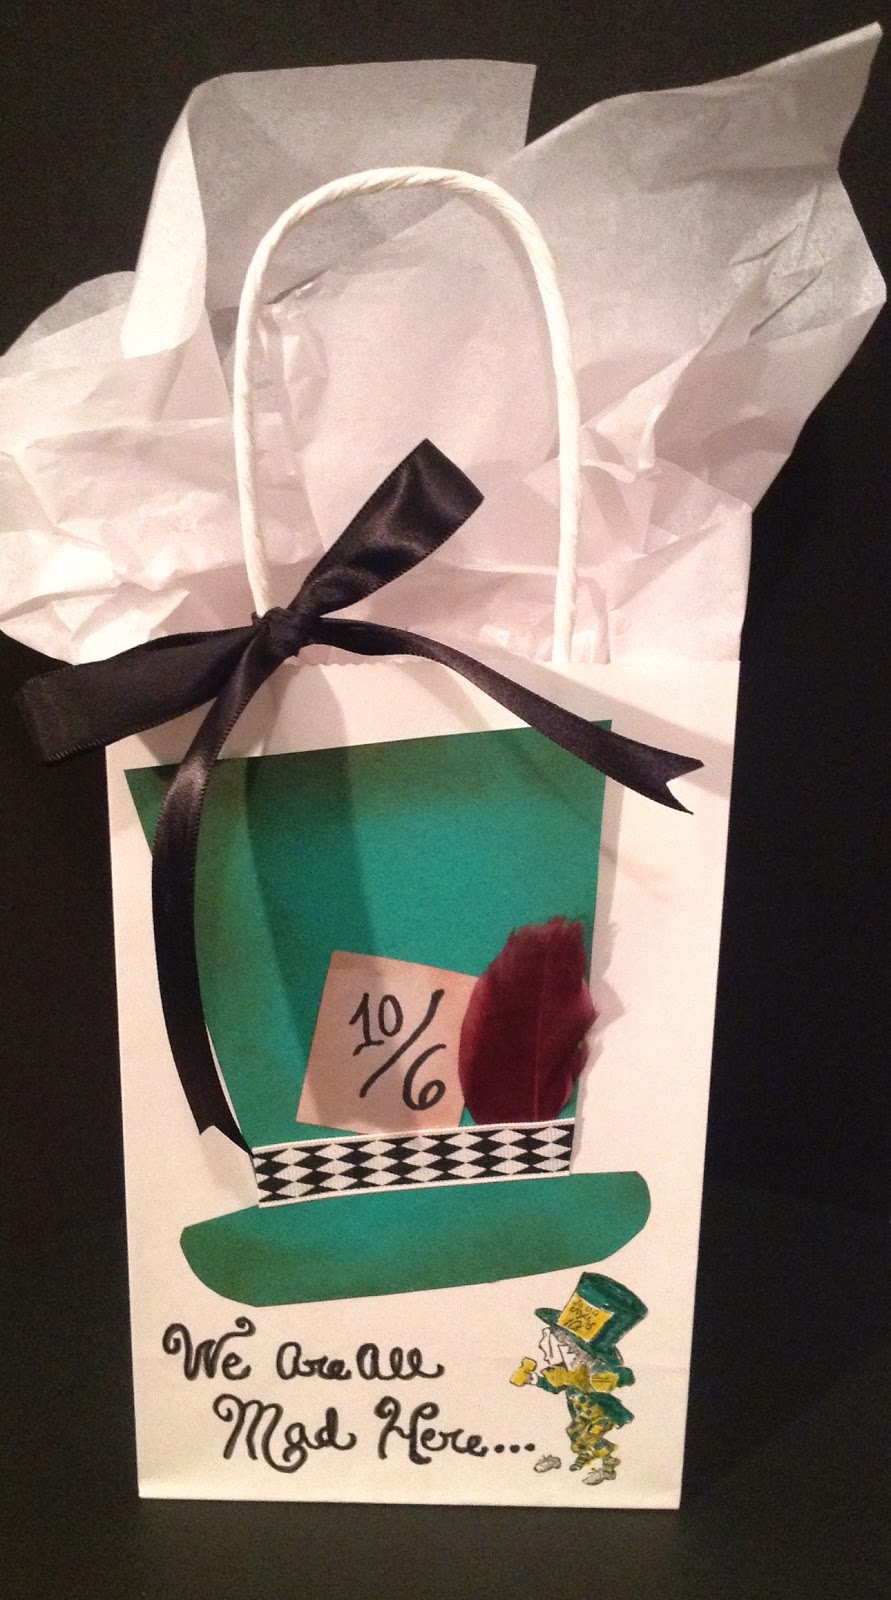 Craft Room Secrets: Alice in Wonderland Inspired Gifts Bags and Tags